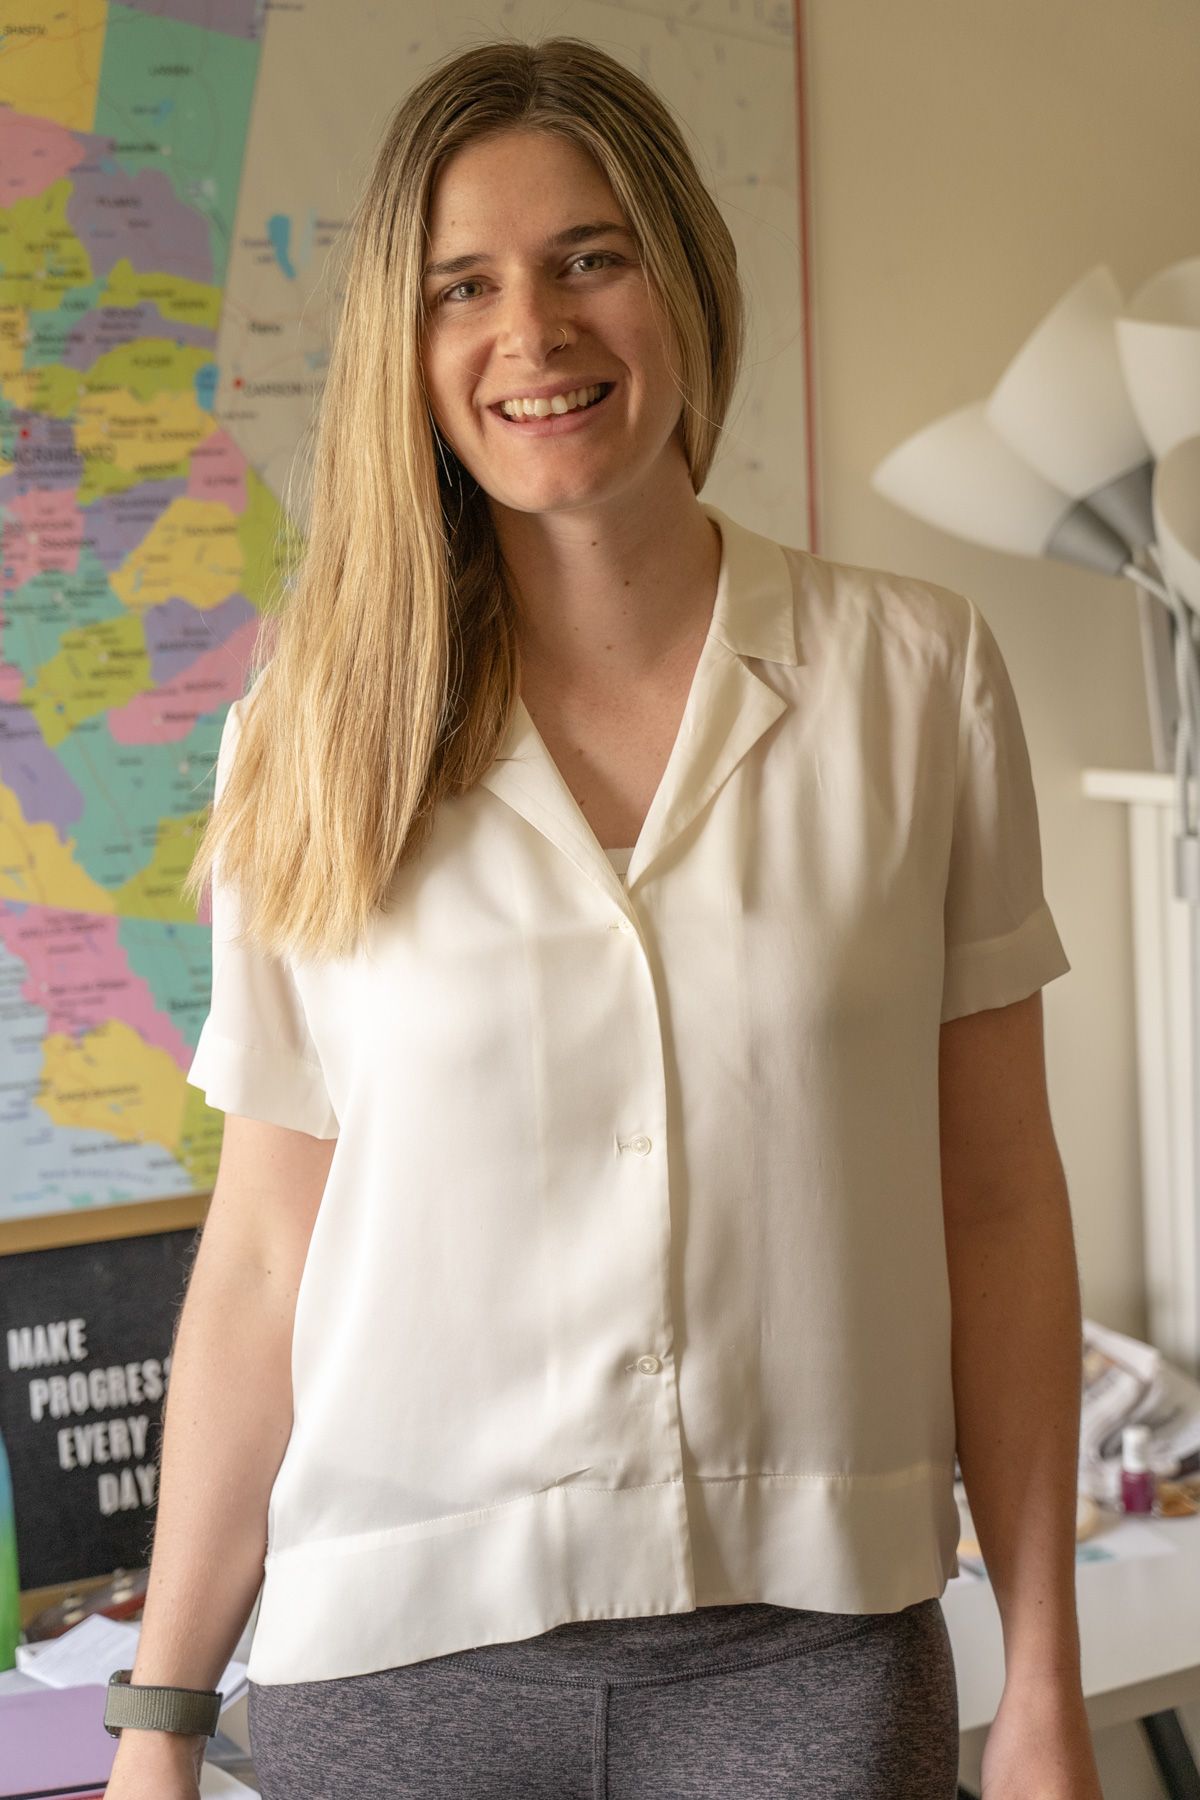 A young woman wearing a white Stretch Silk Short Sleeve Notch Collar Blouse stands facing the camera, smiling, in an interior setting with a map of California on the wall behind her.